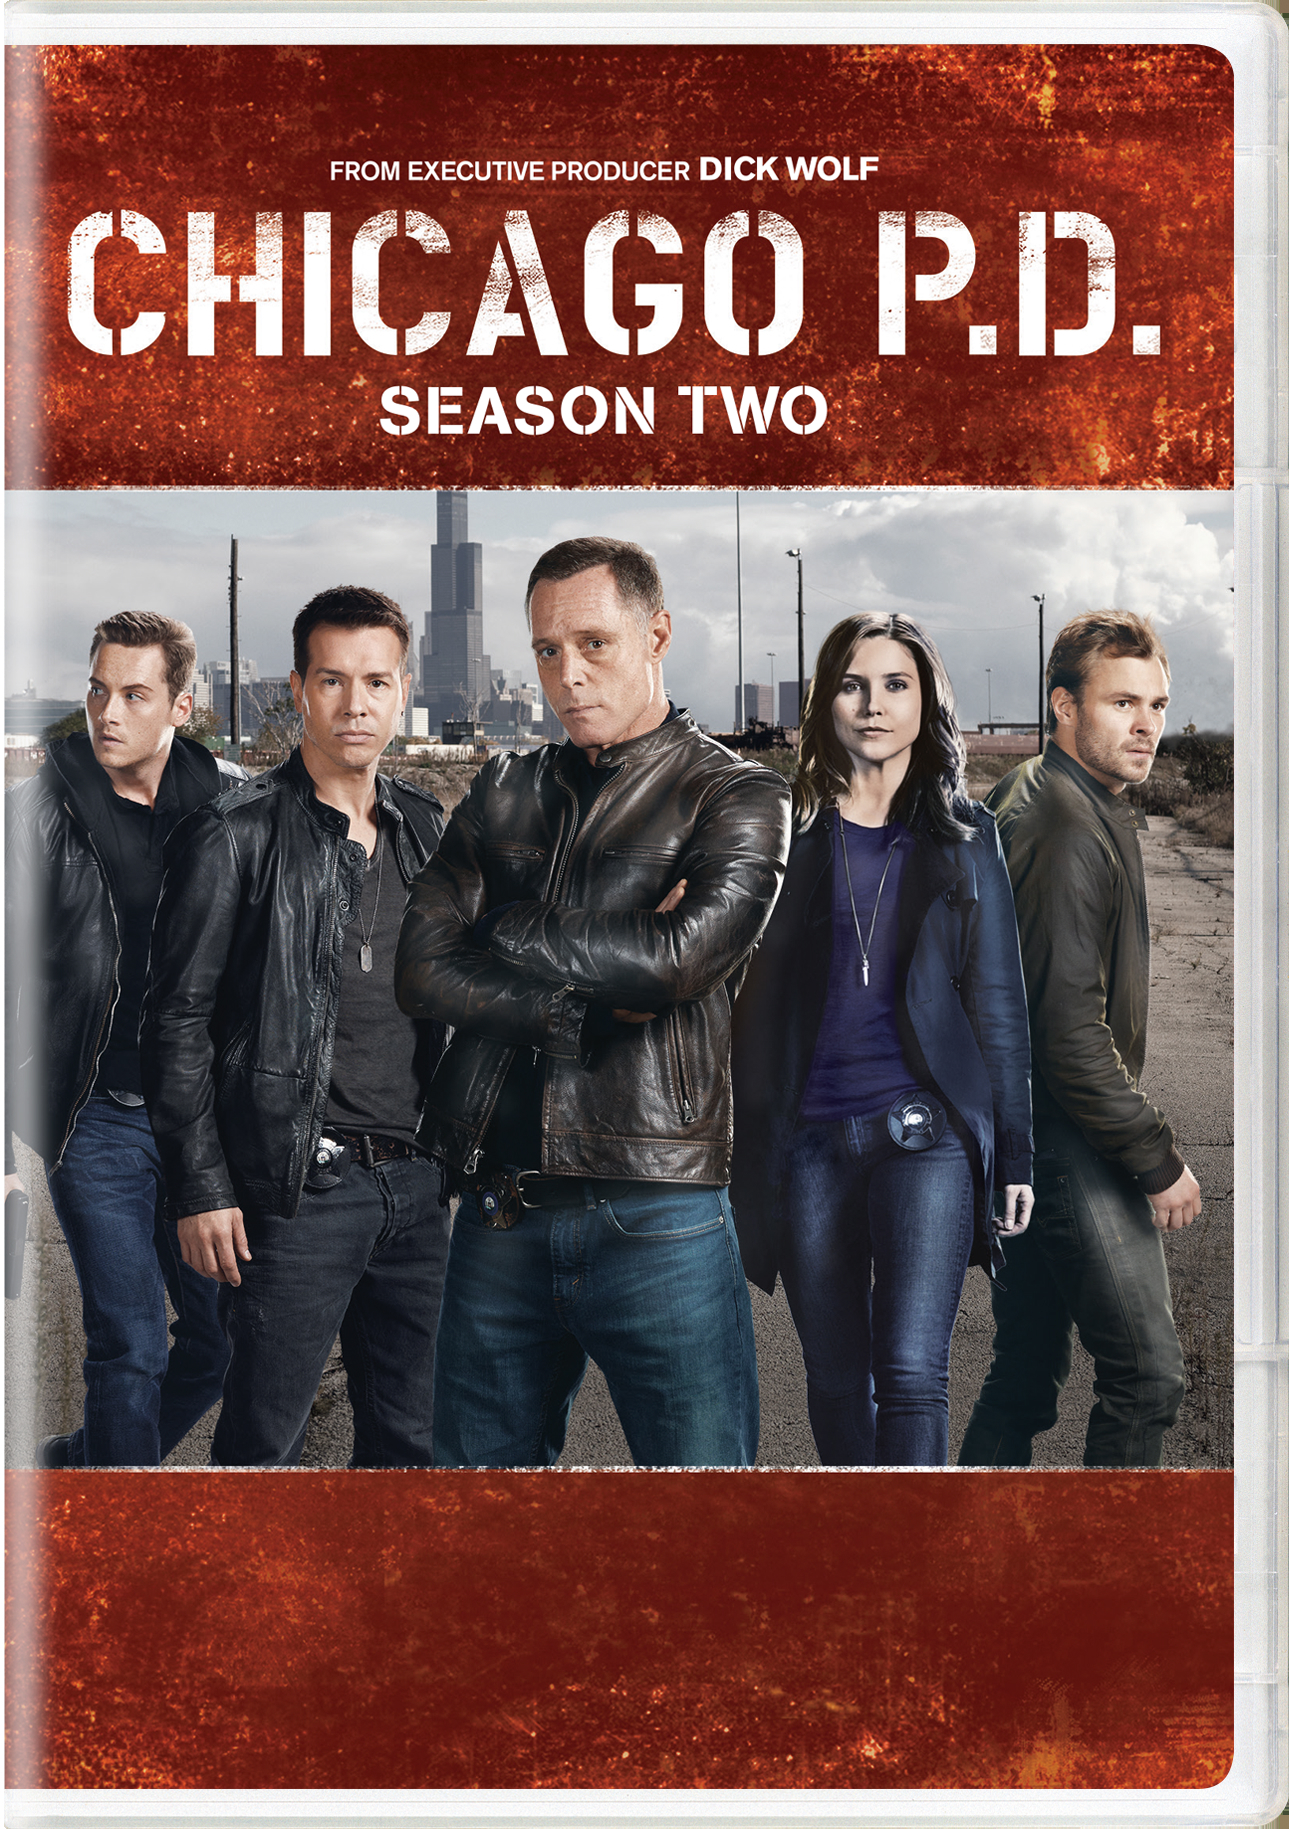 Chicago P.D.: Season Two - DVD   - Drama Television On DVD - TV Shows On GRUV